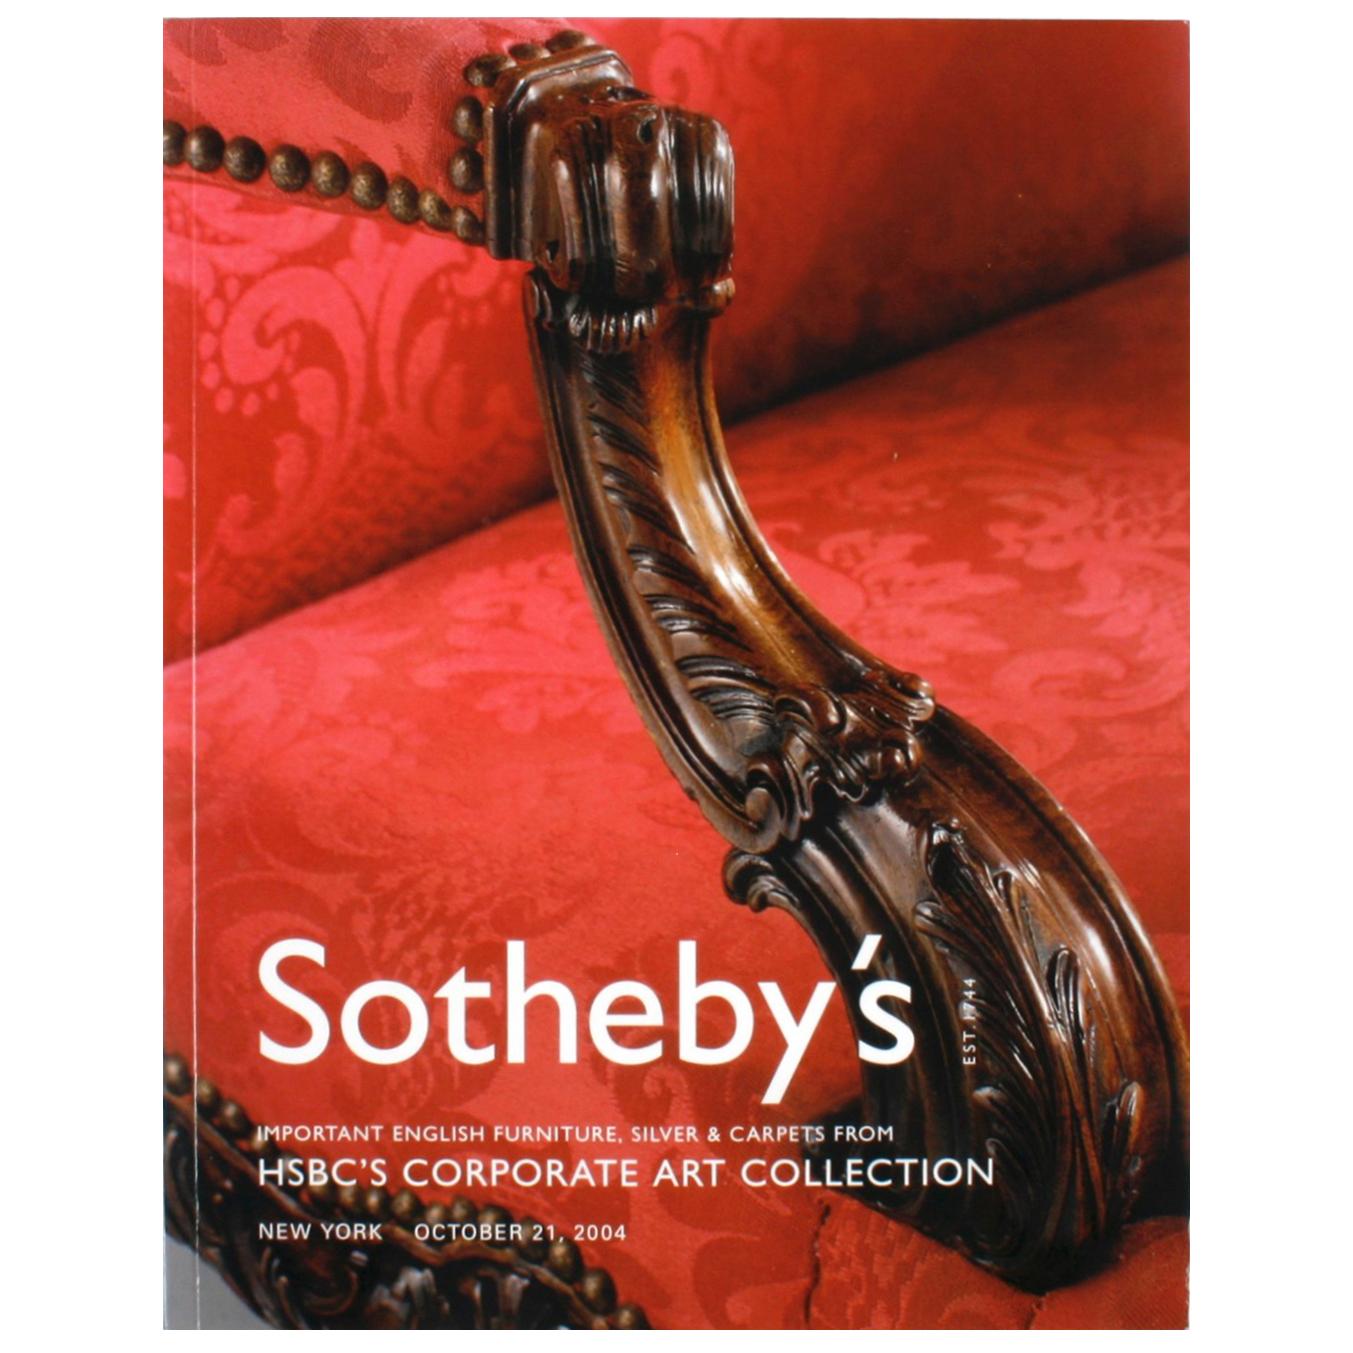 Sotheby's: New York Important English Furniture, Silver & Carpets from HSBC